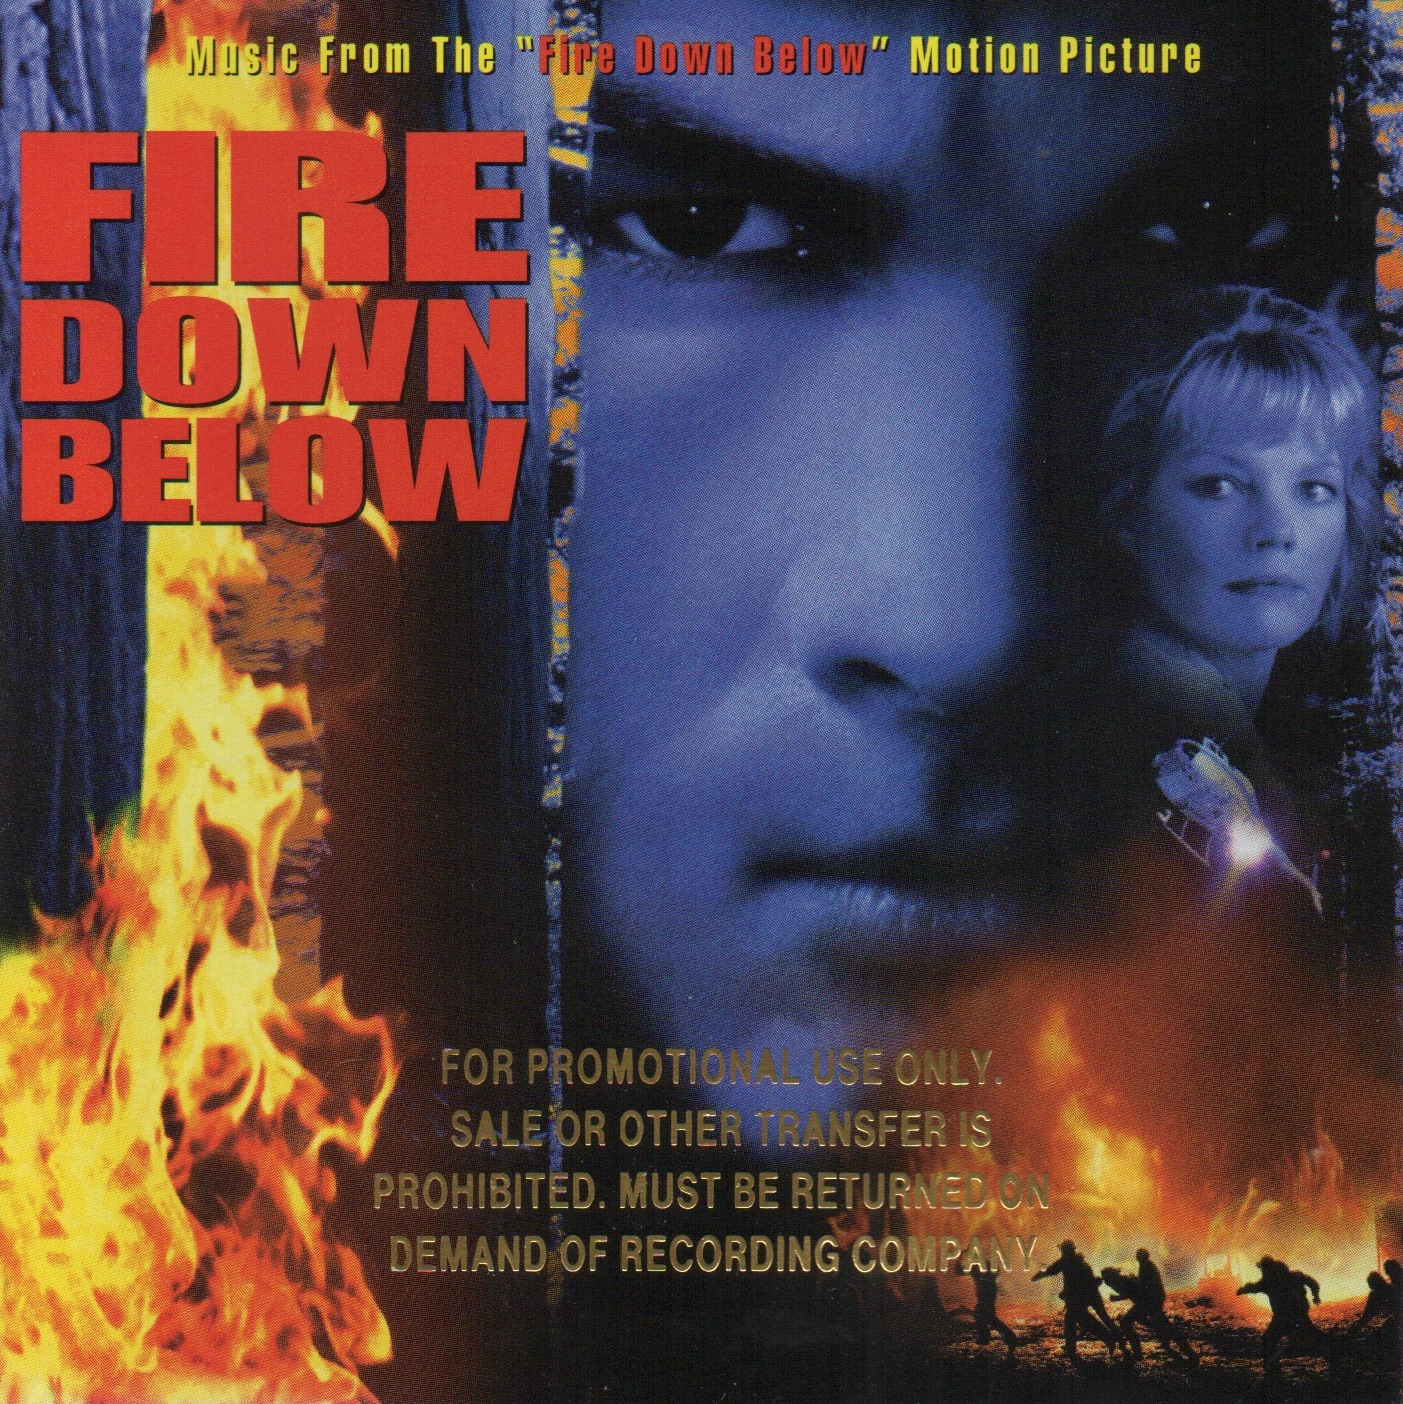 Music From The "Fire Down Below" Motion PictureMusic From The "Fire Down Below" Motion Picture